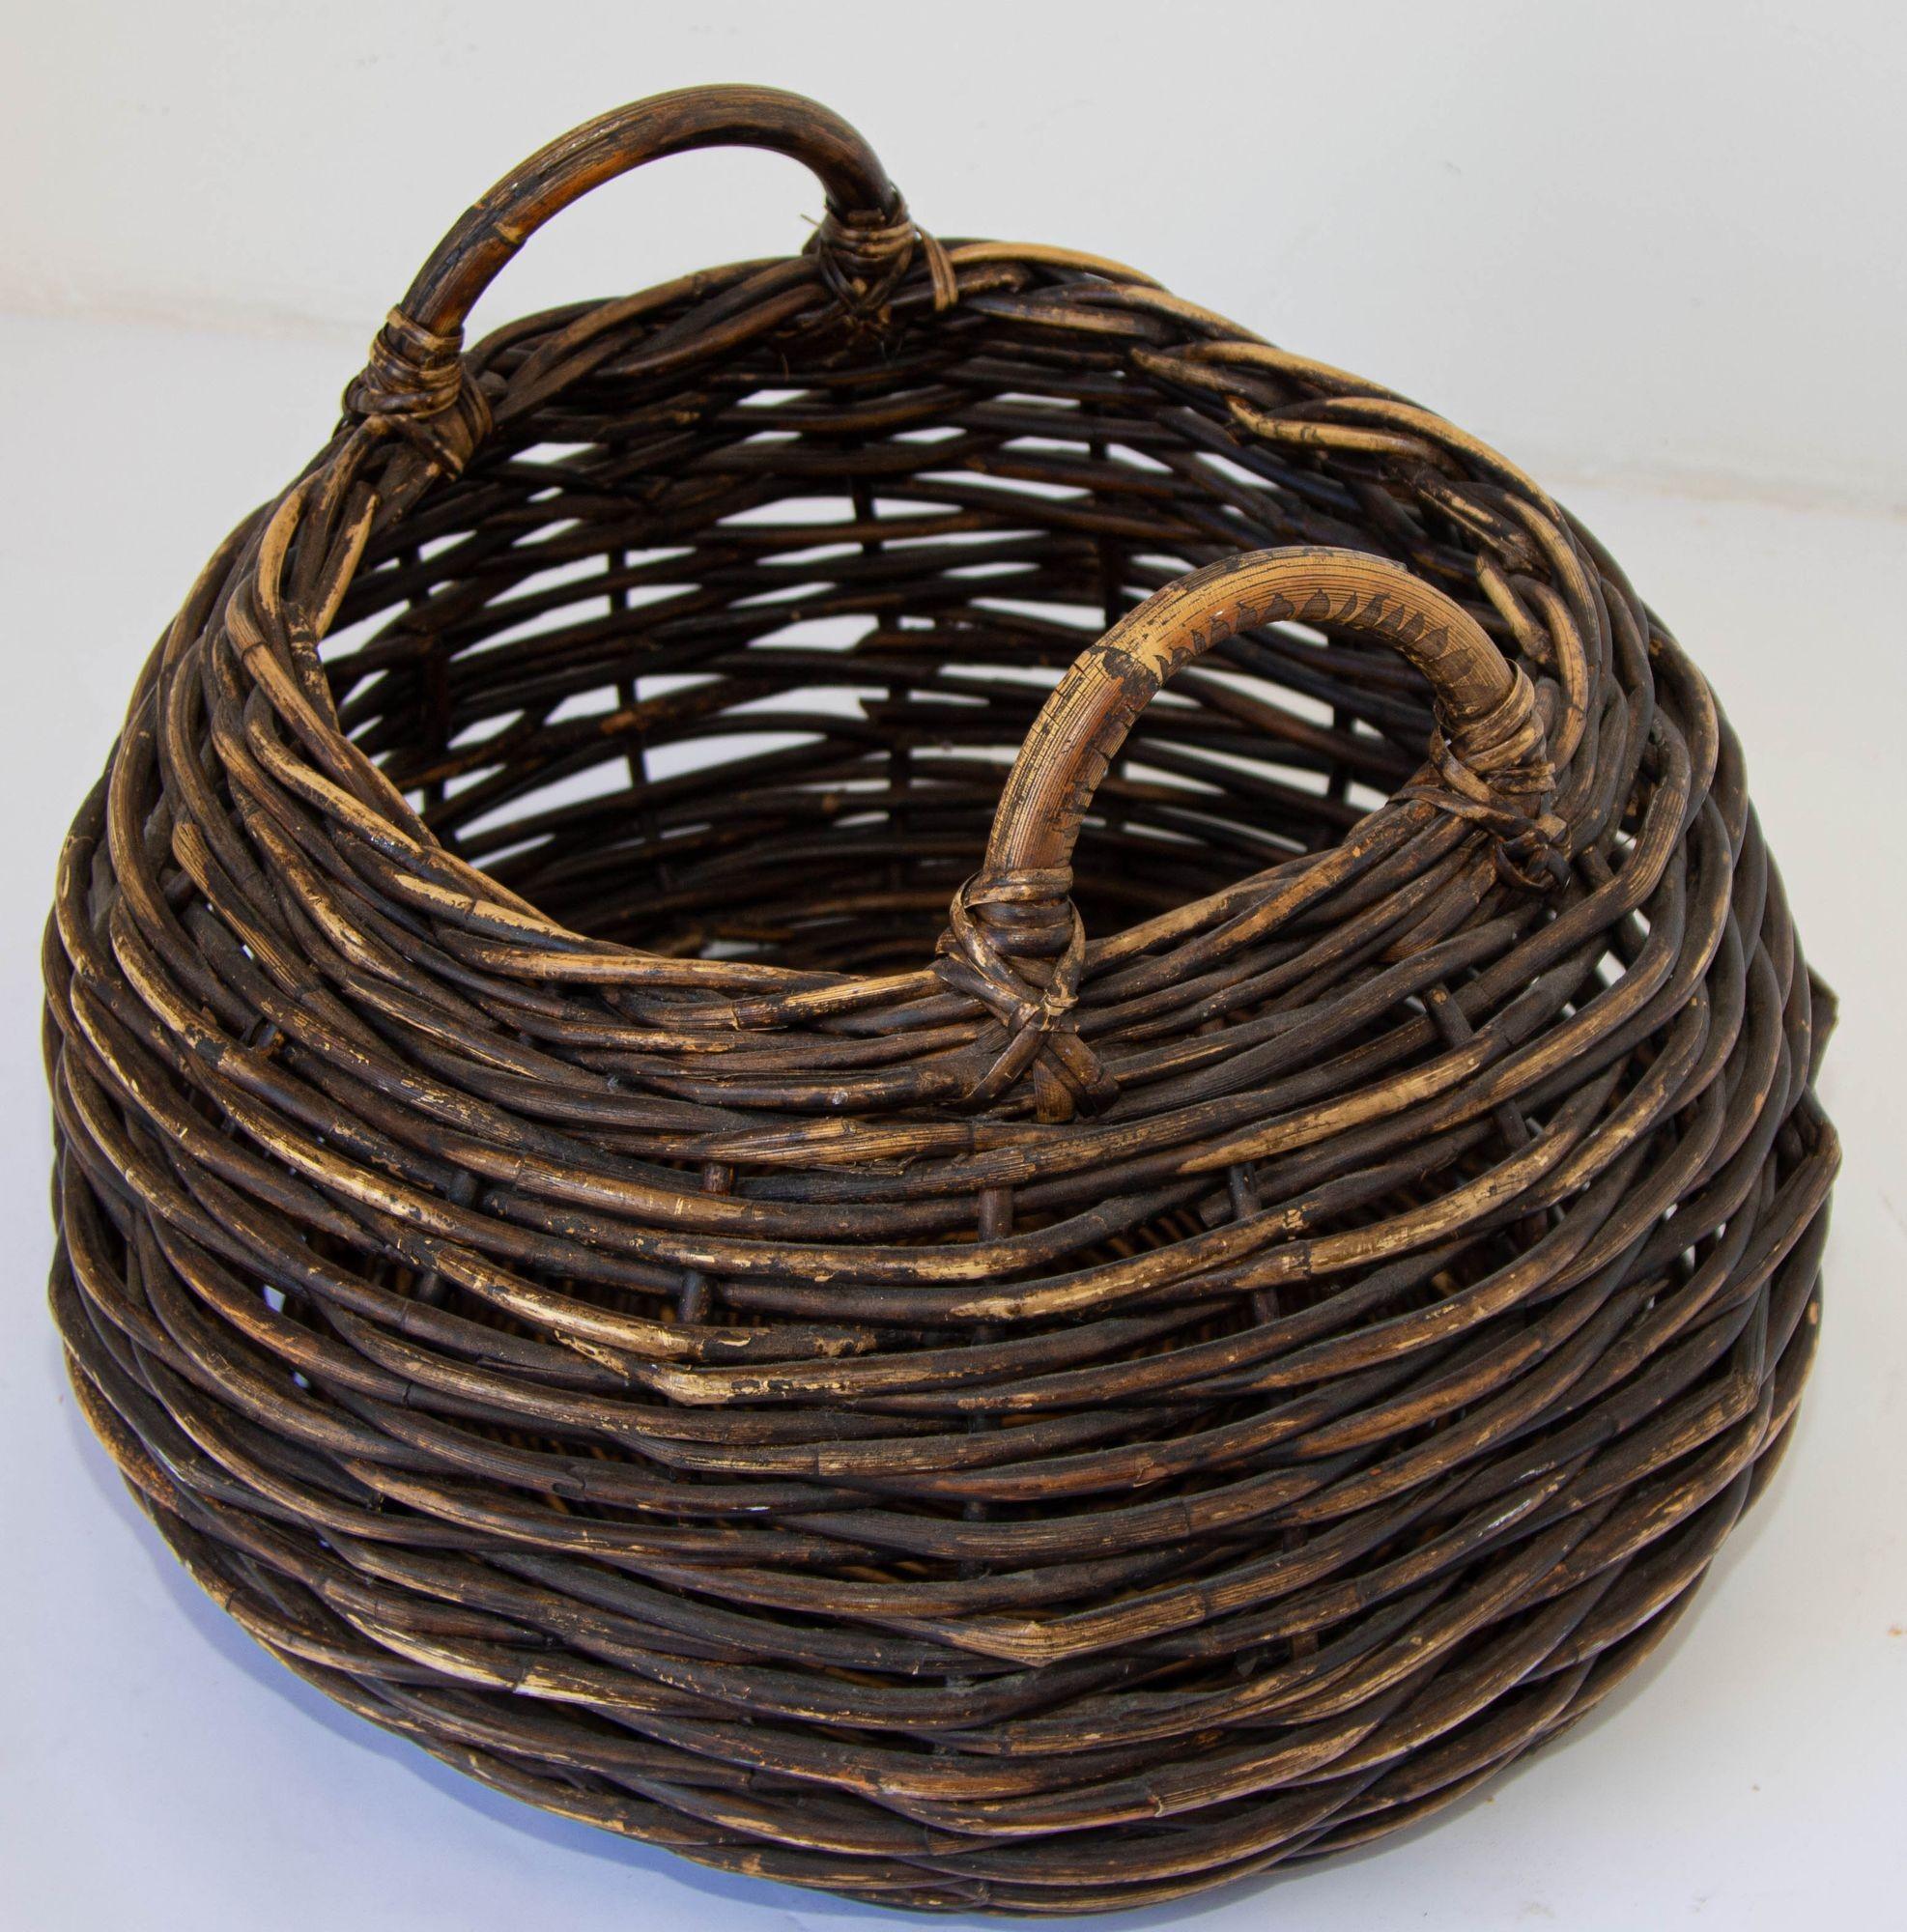 Antique French Handwoven Wicker Harvest Basket with Wood Handle 5